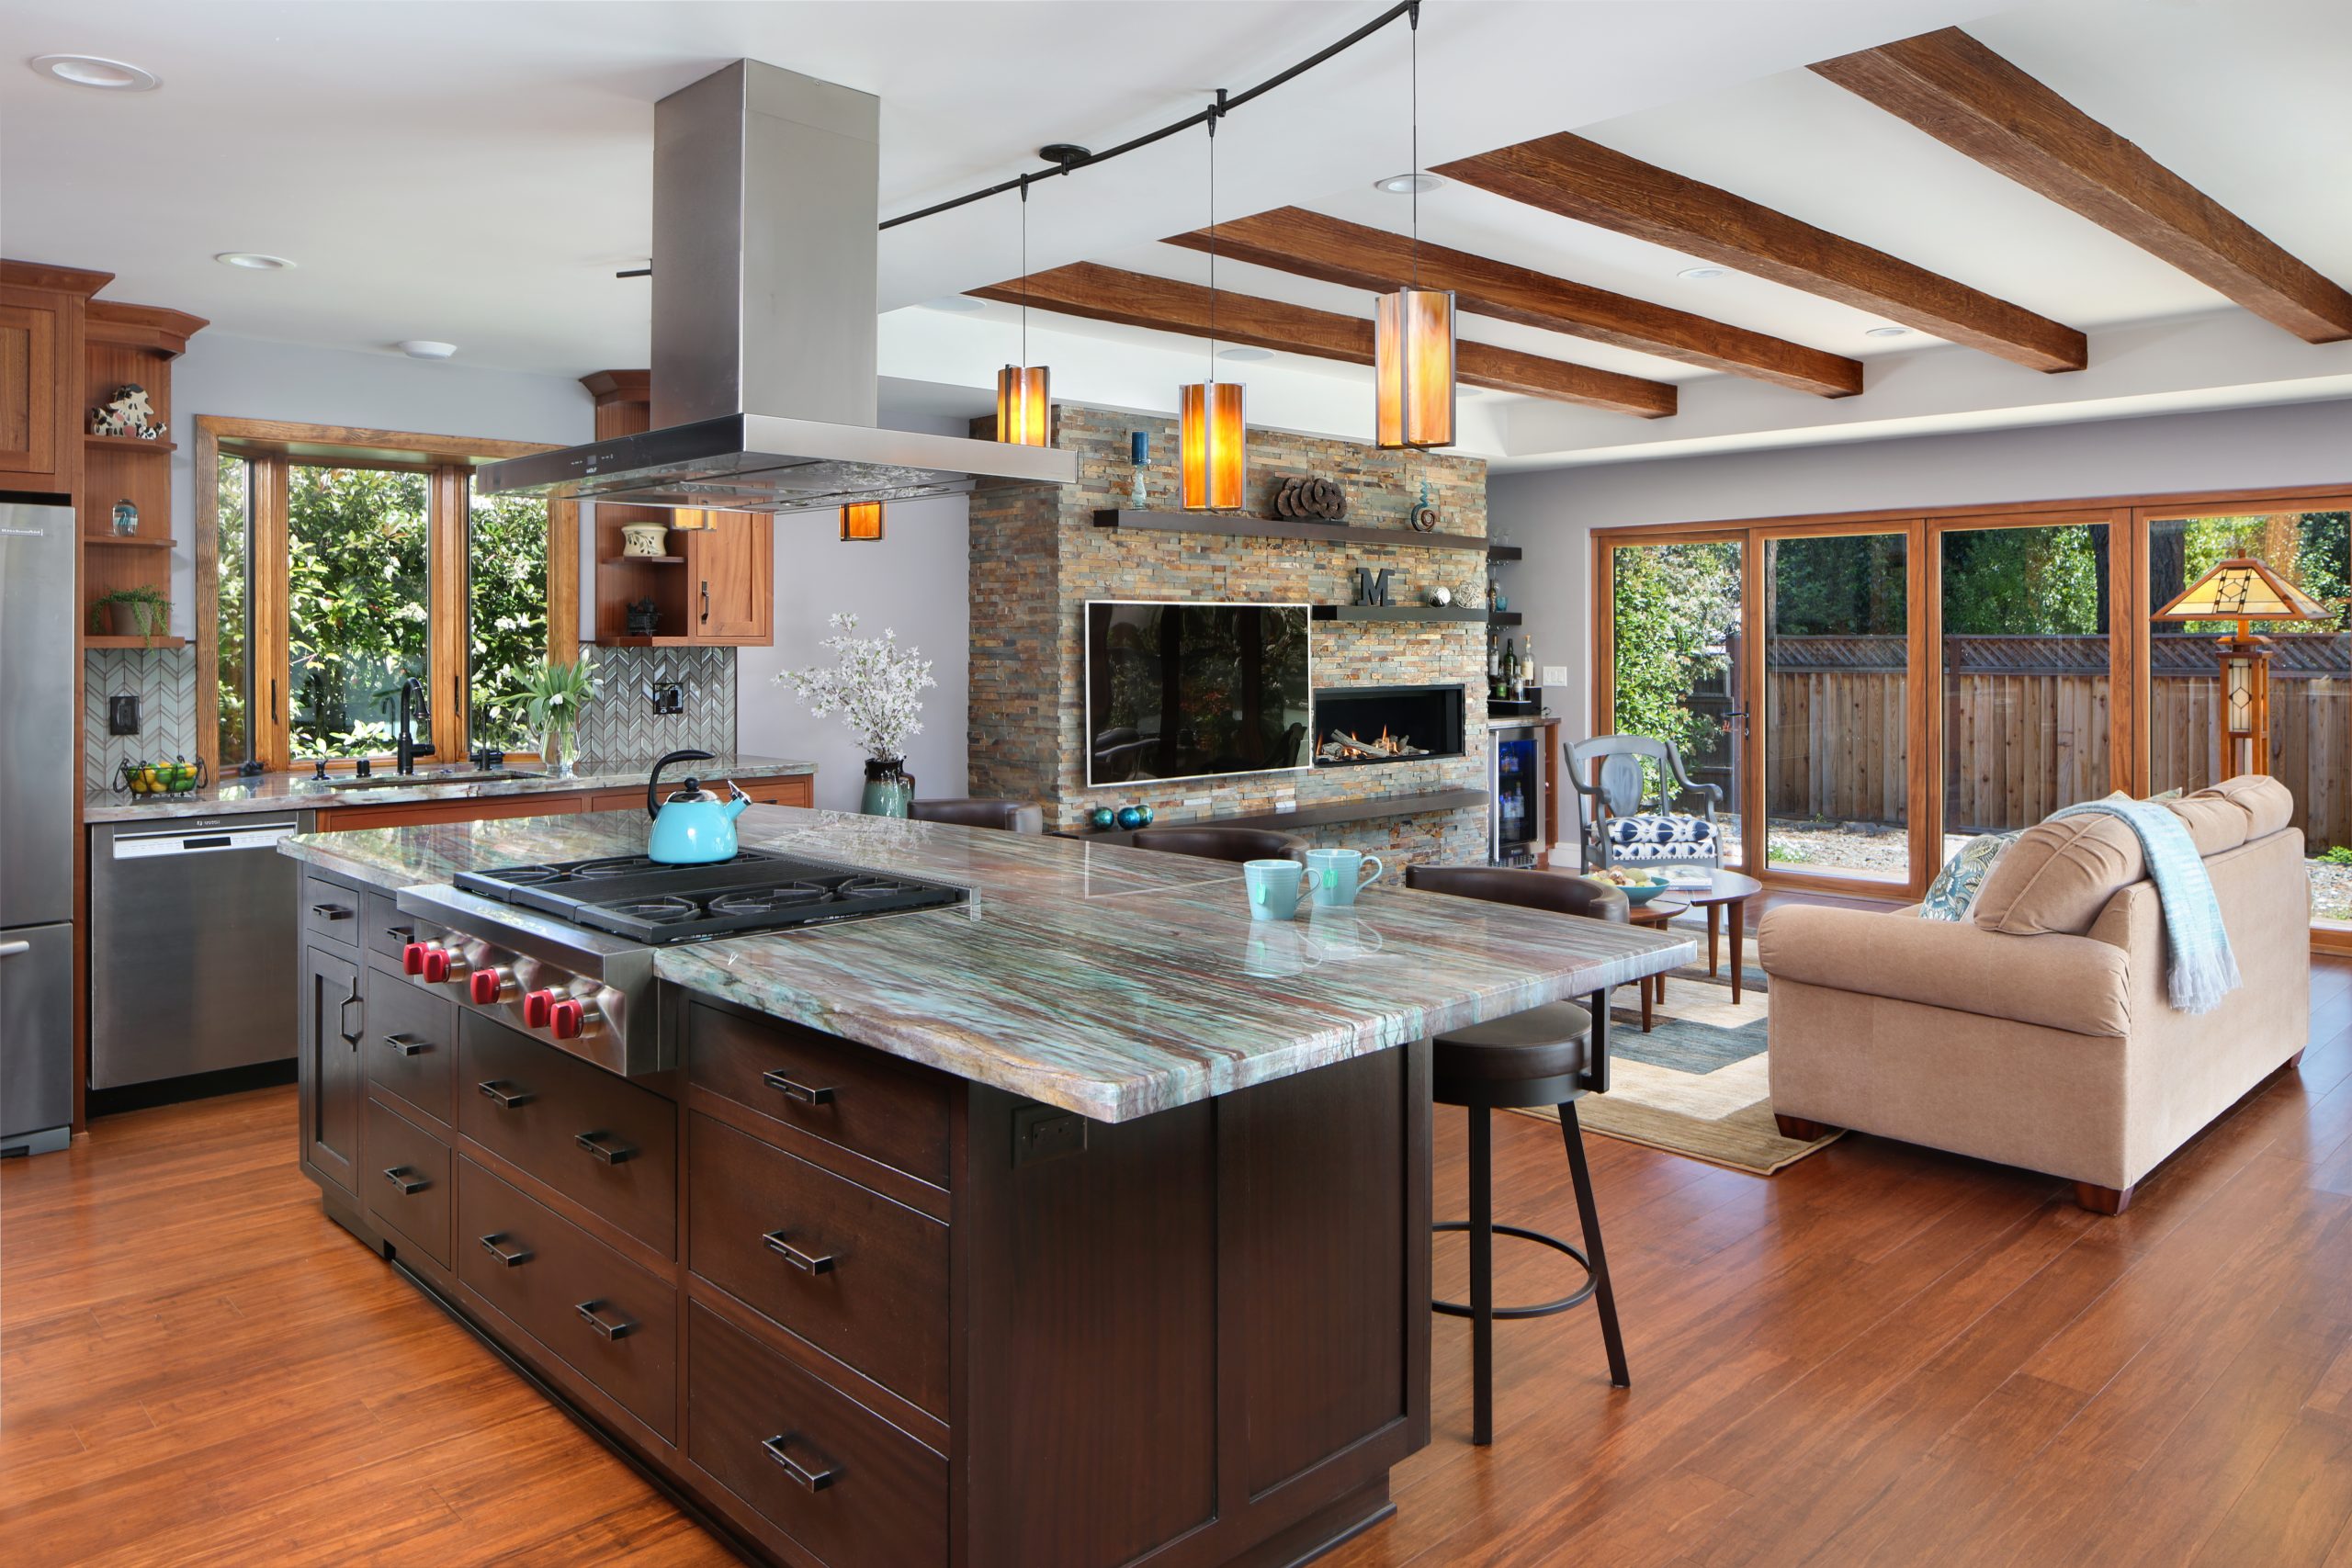 A kitchen island with granite counter tops and built in gas stove.